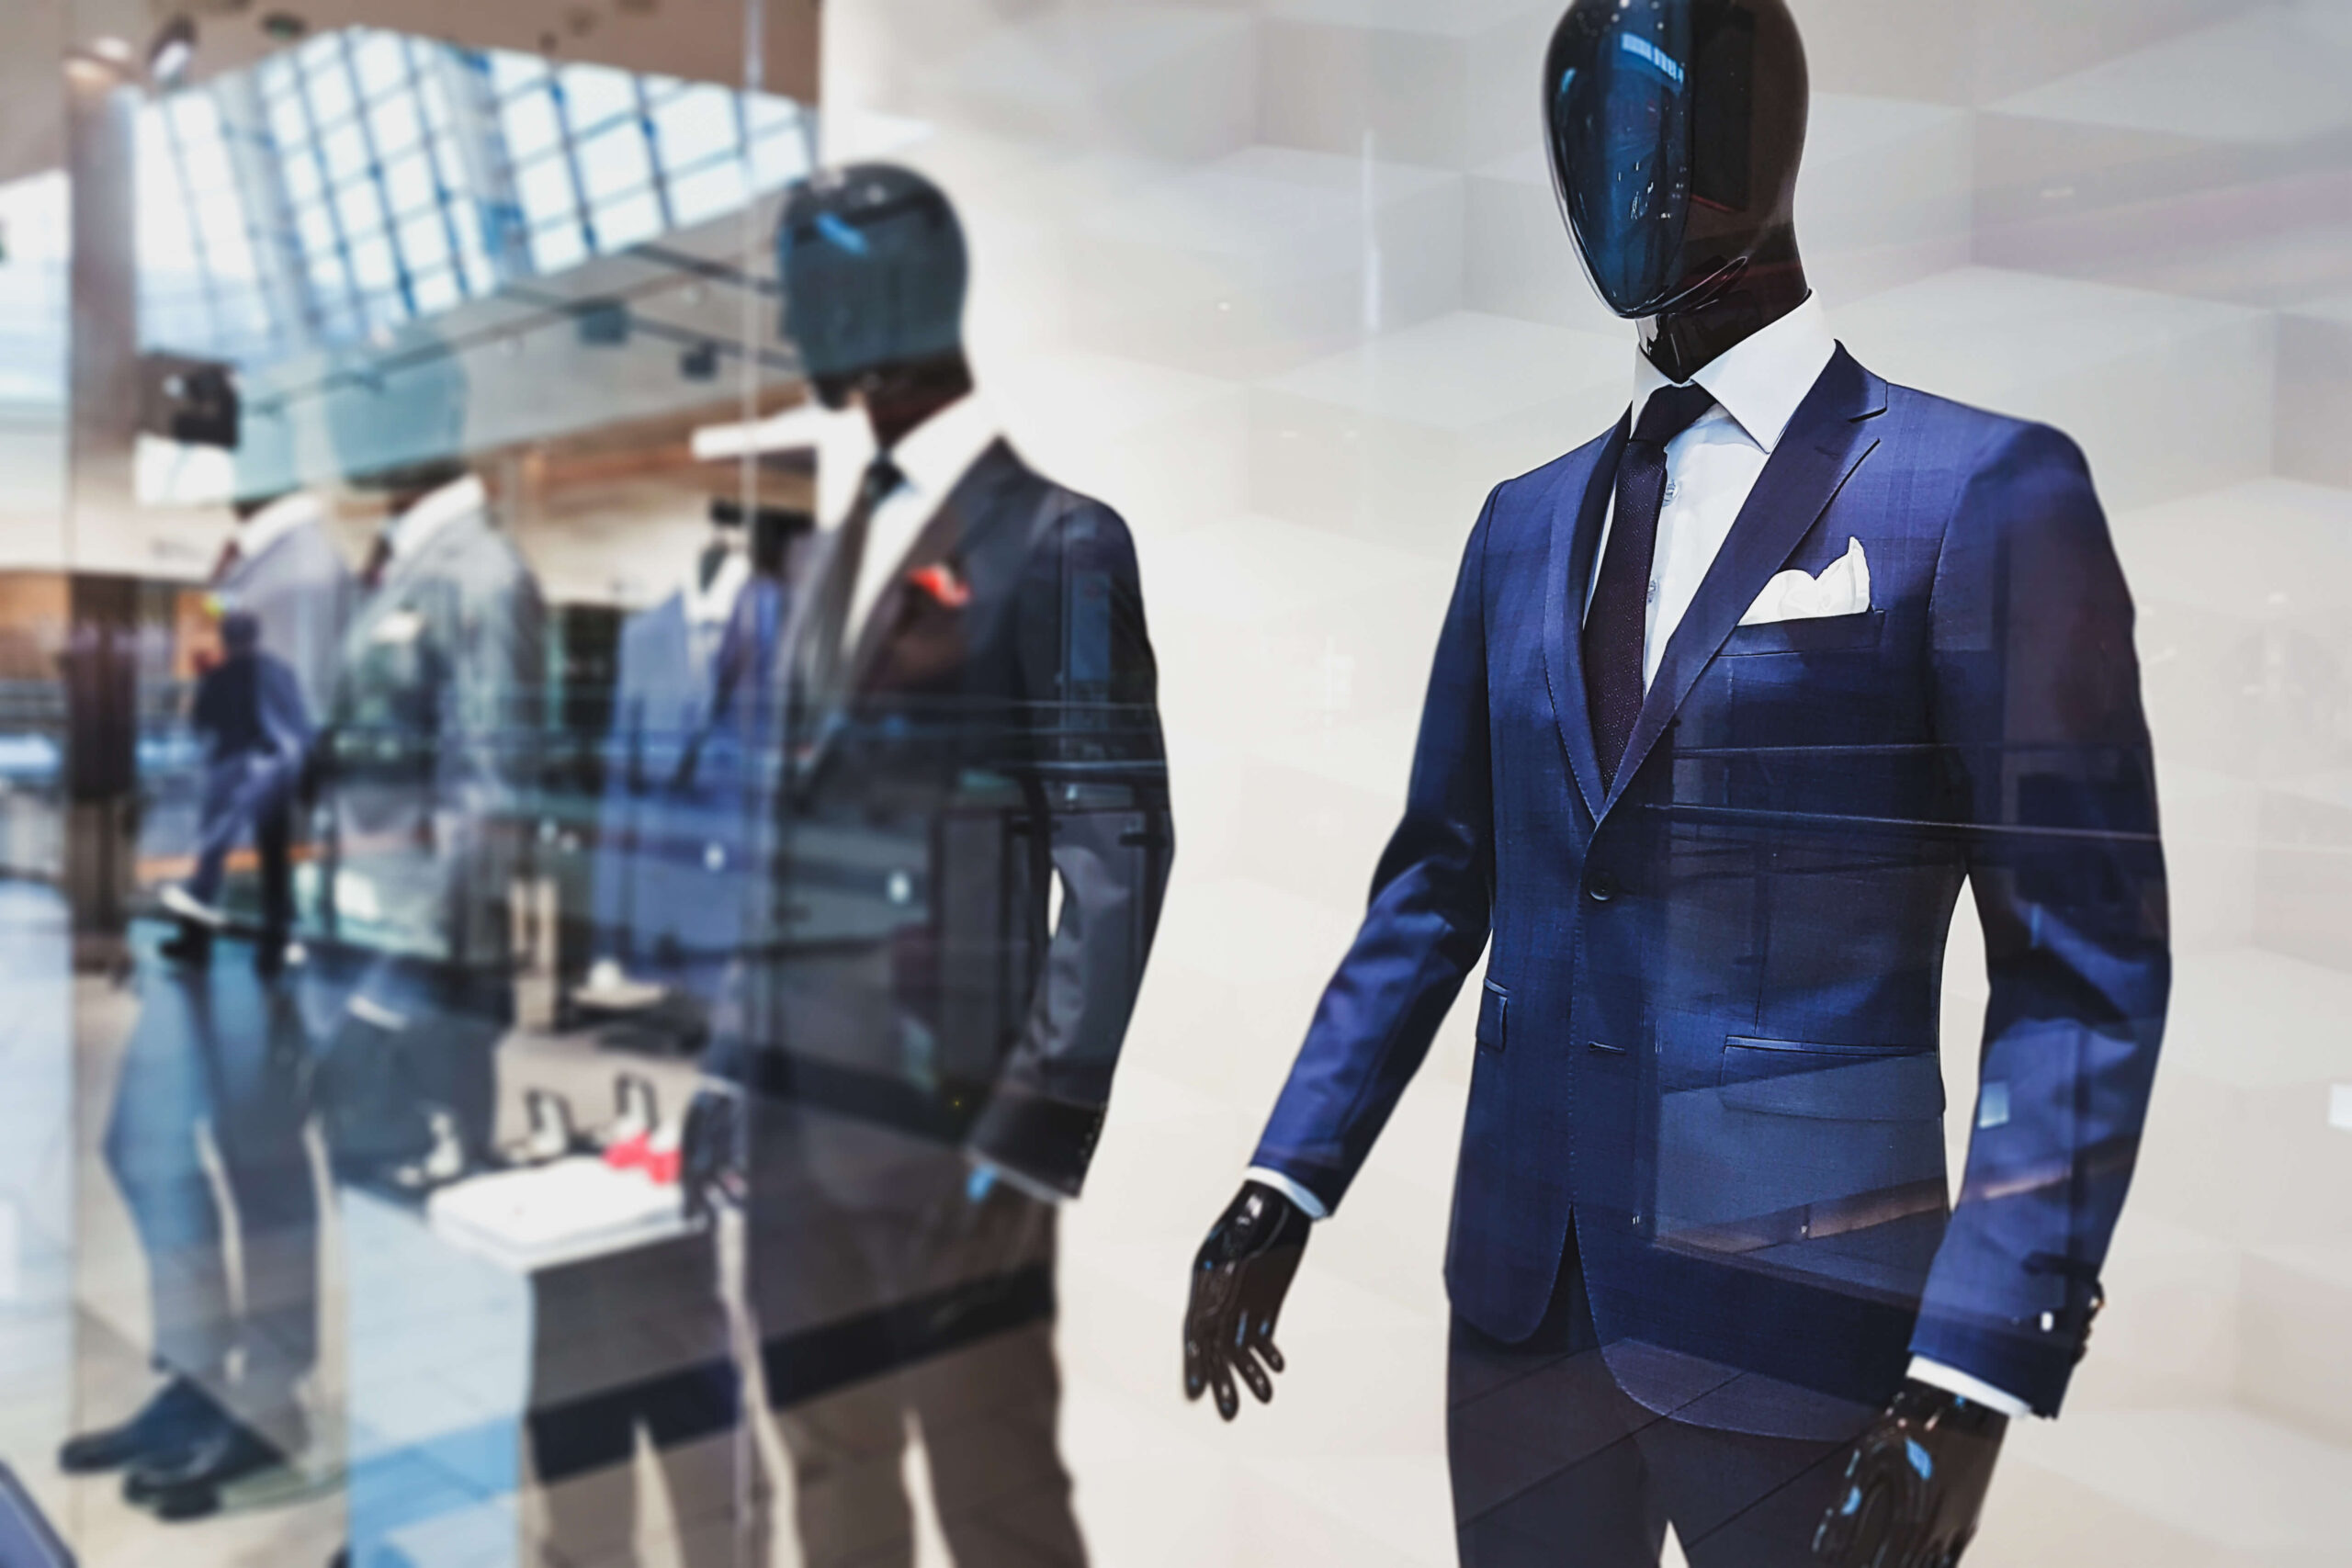 storefront with fashionable suits for men